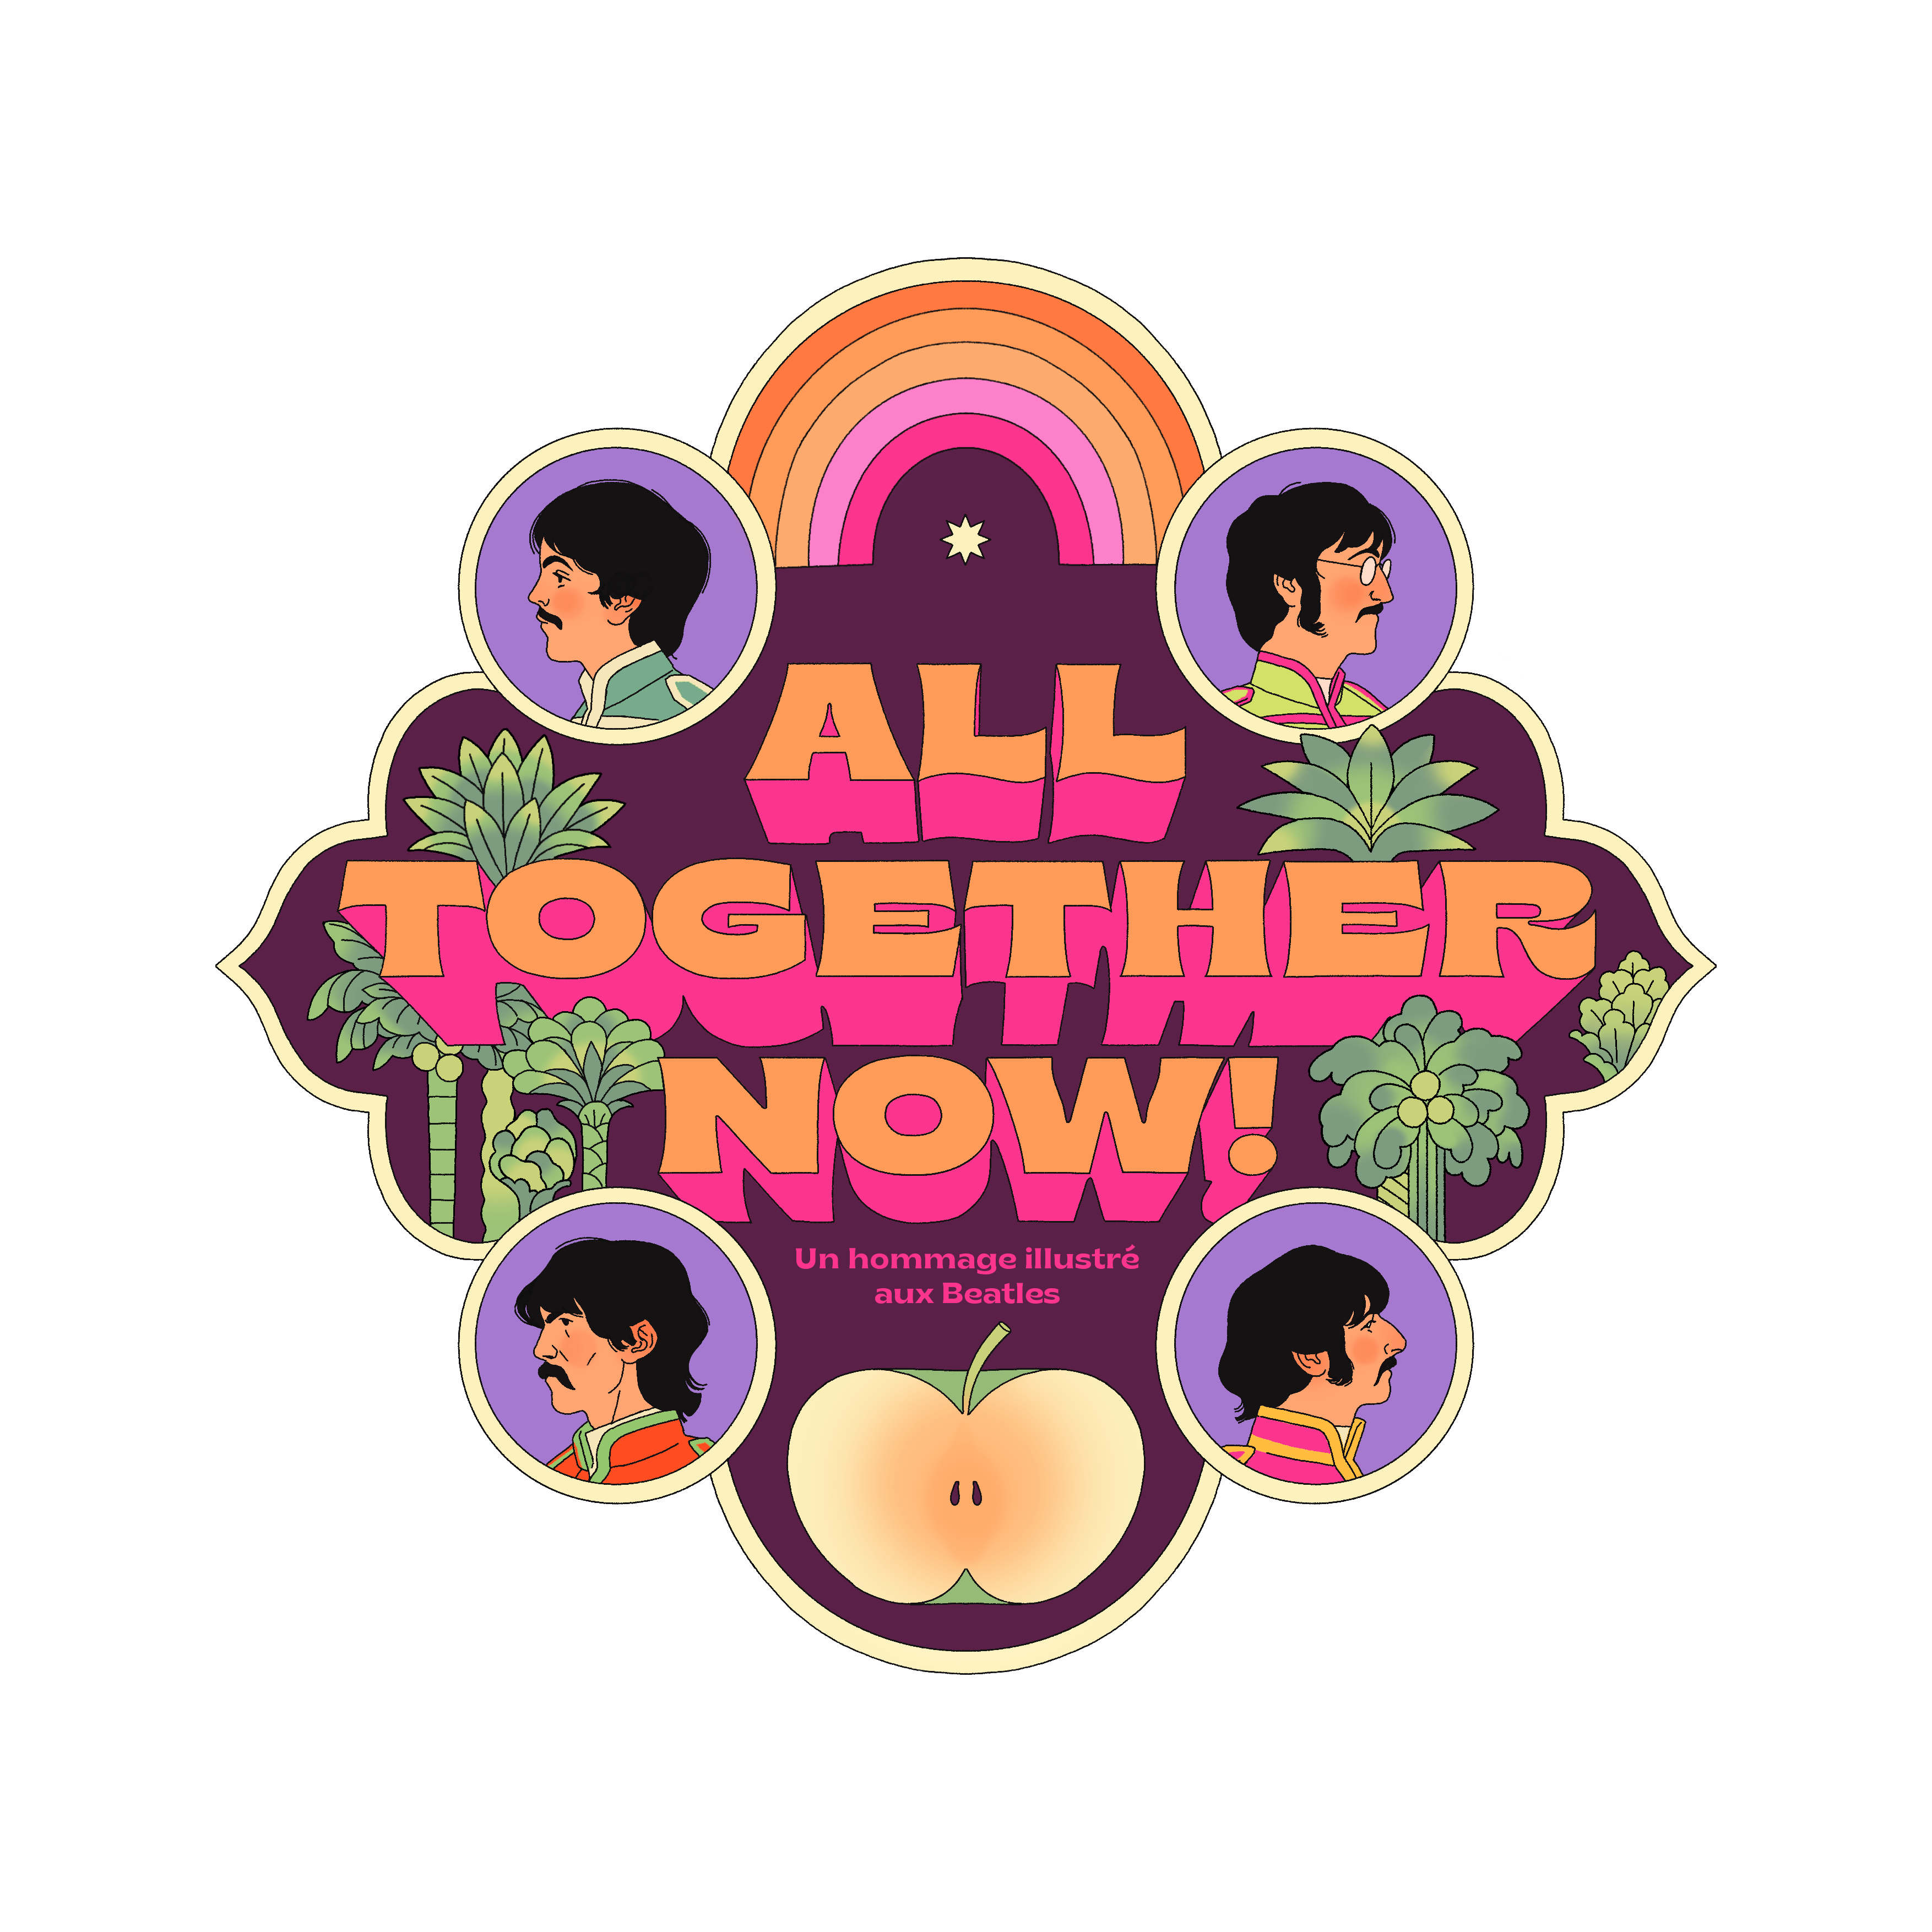 Contreparties du projet "All Together Now" 